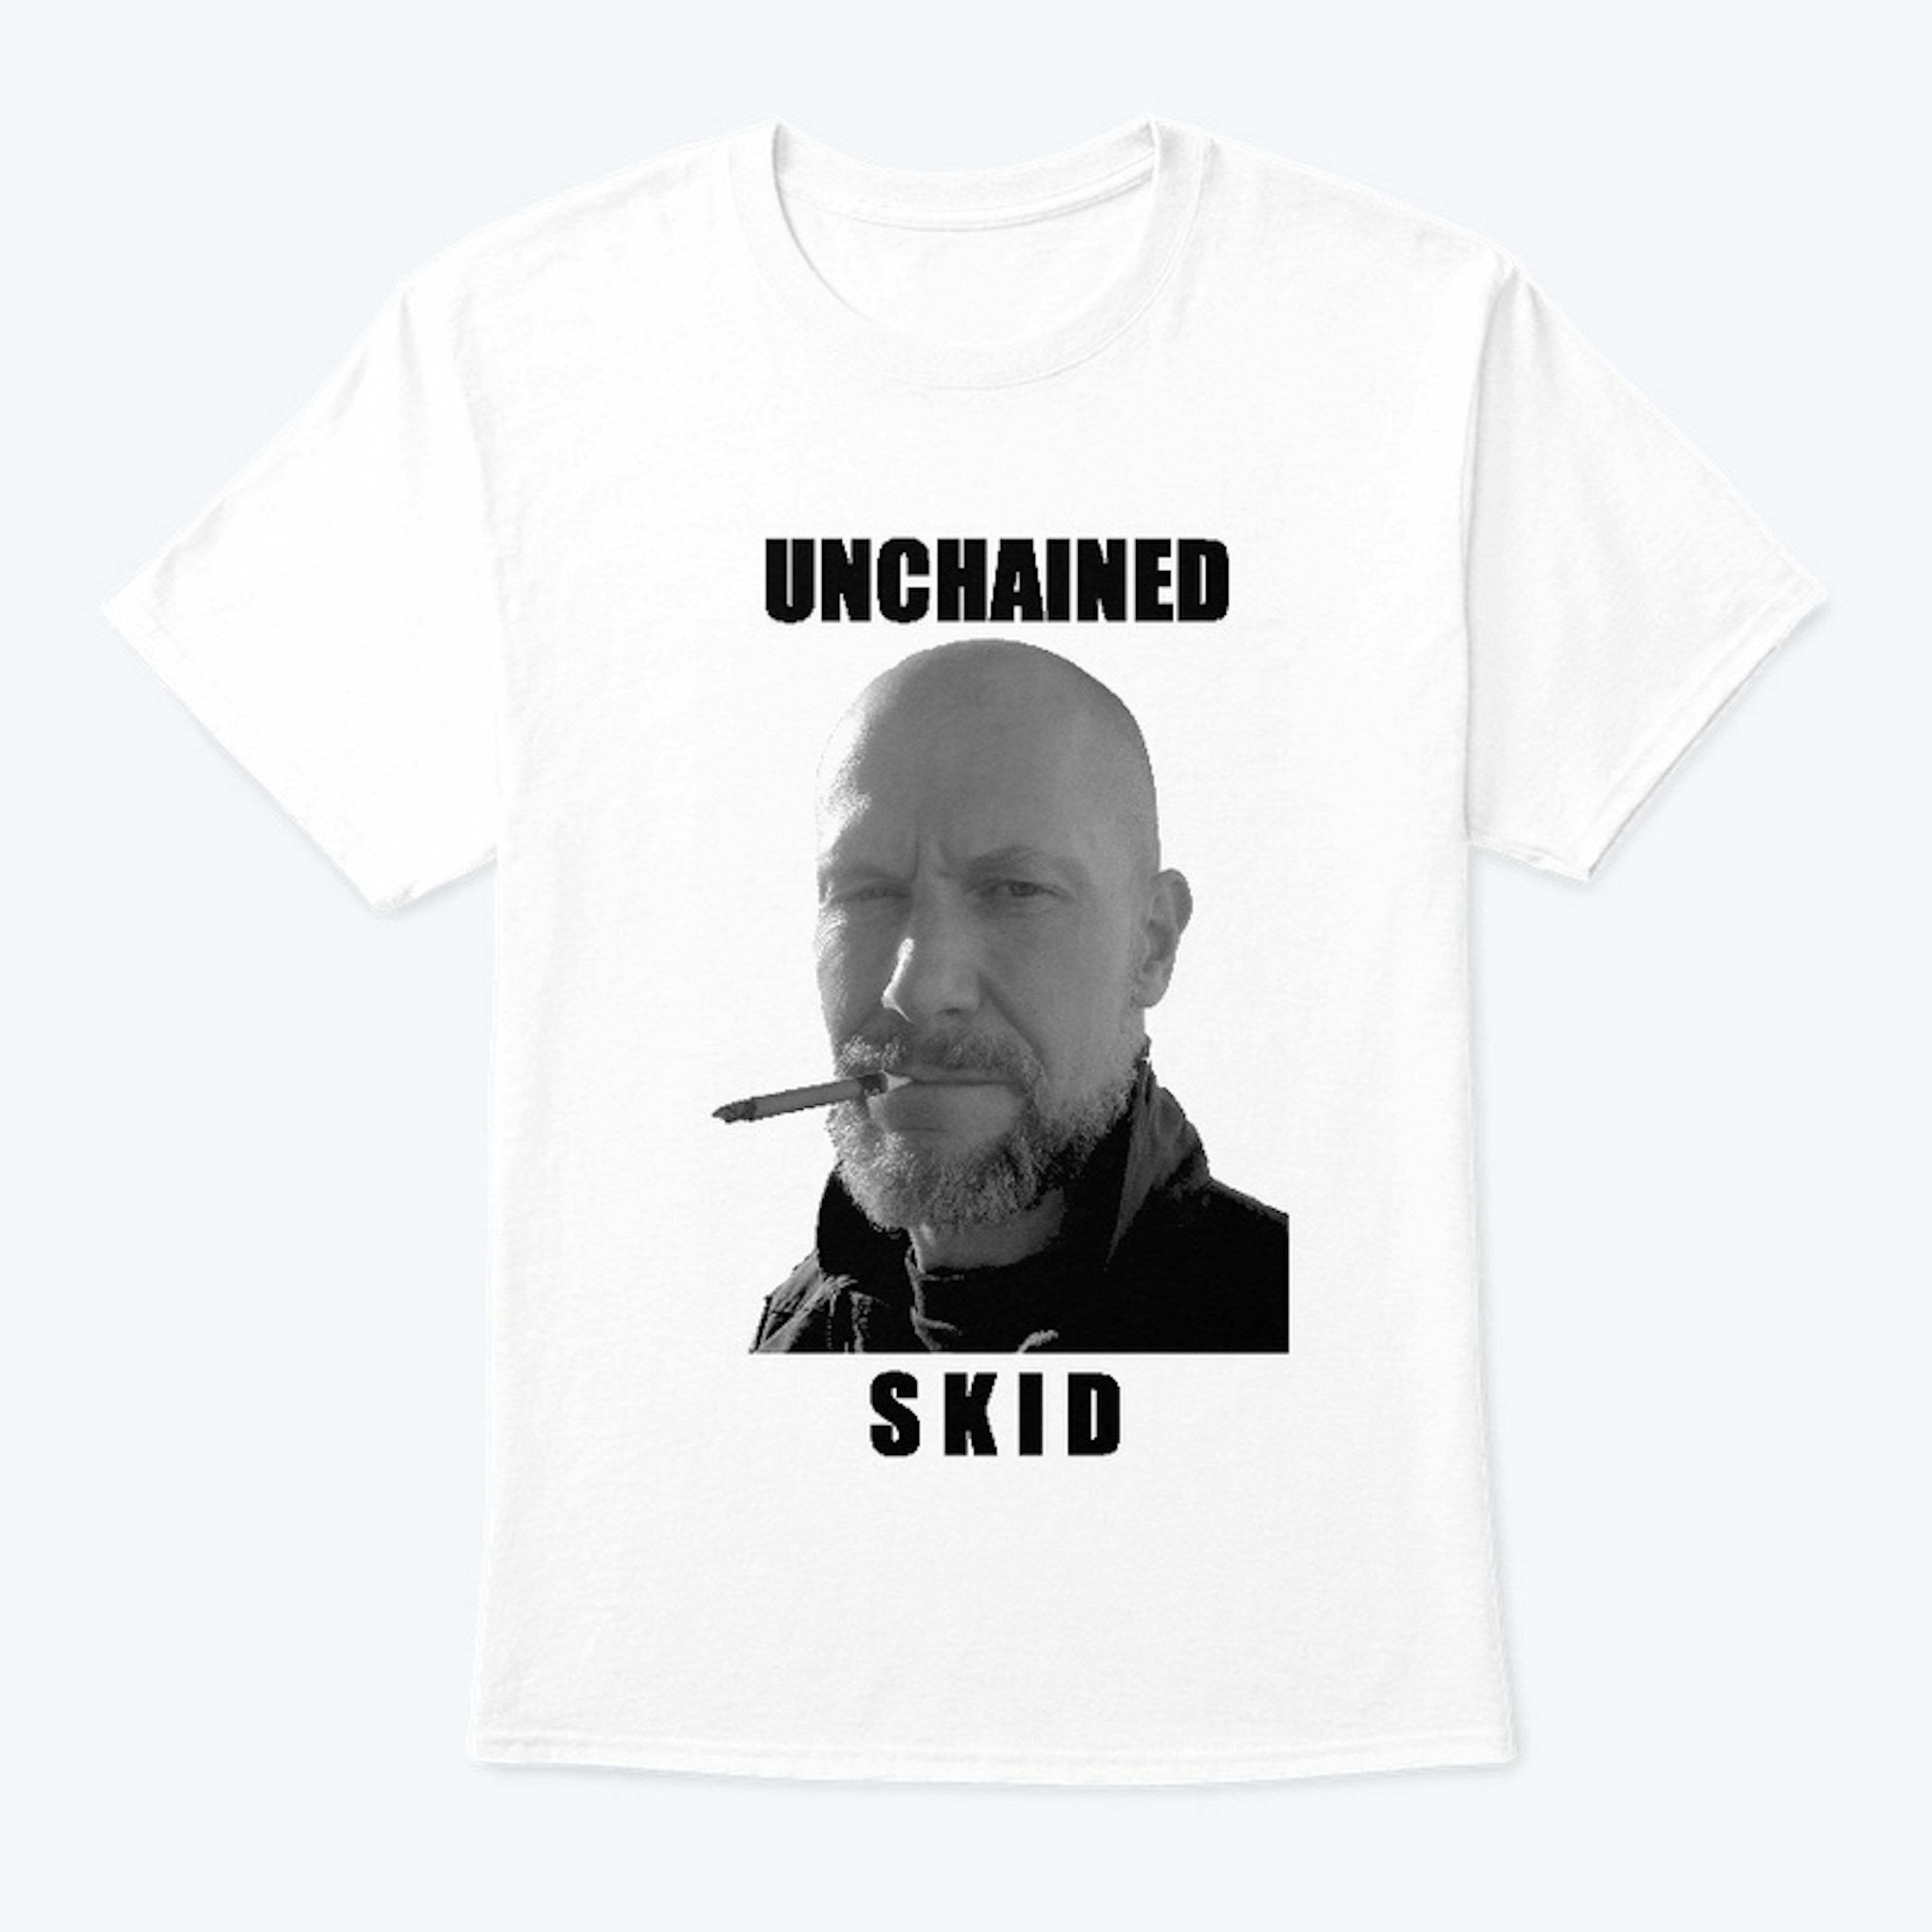 Unchained Skid